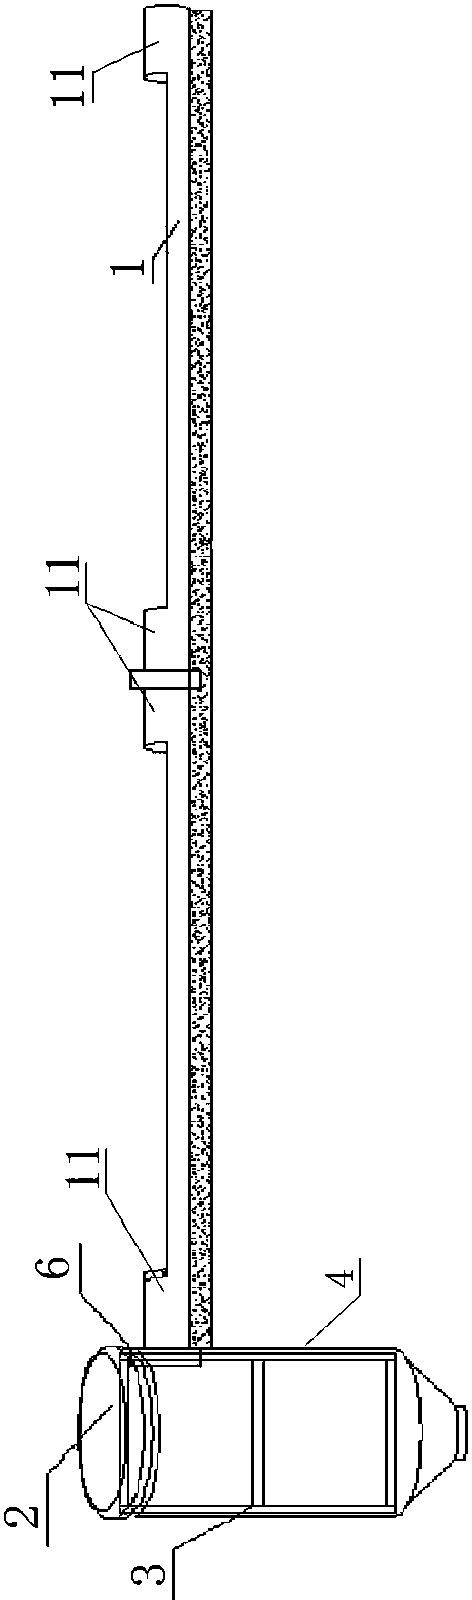 Construction method of water collection and drainage system